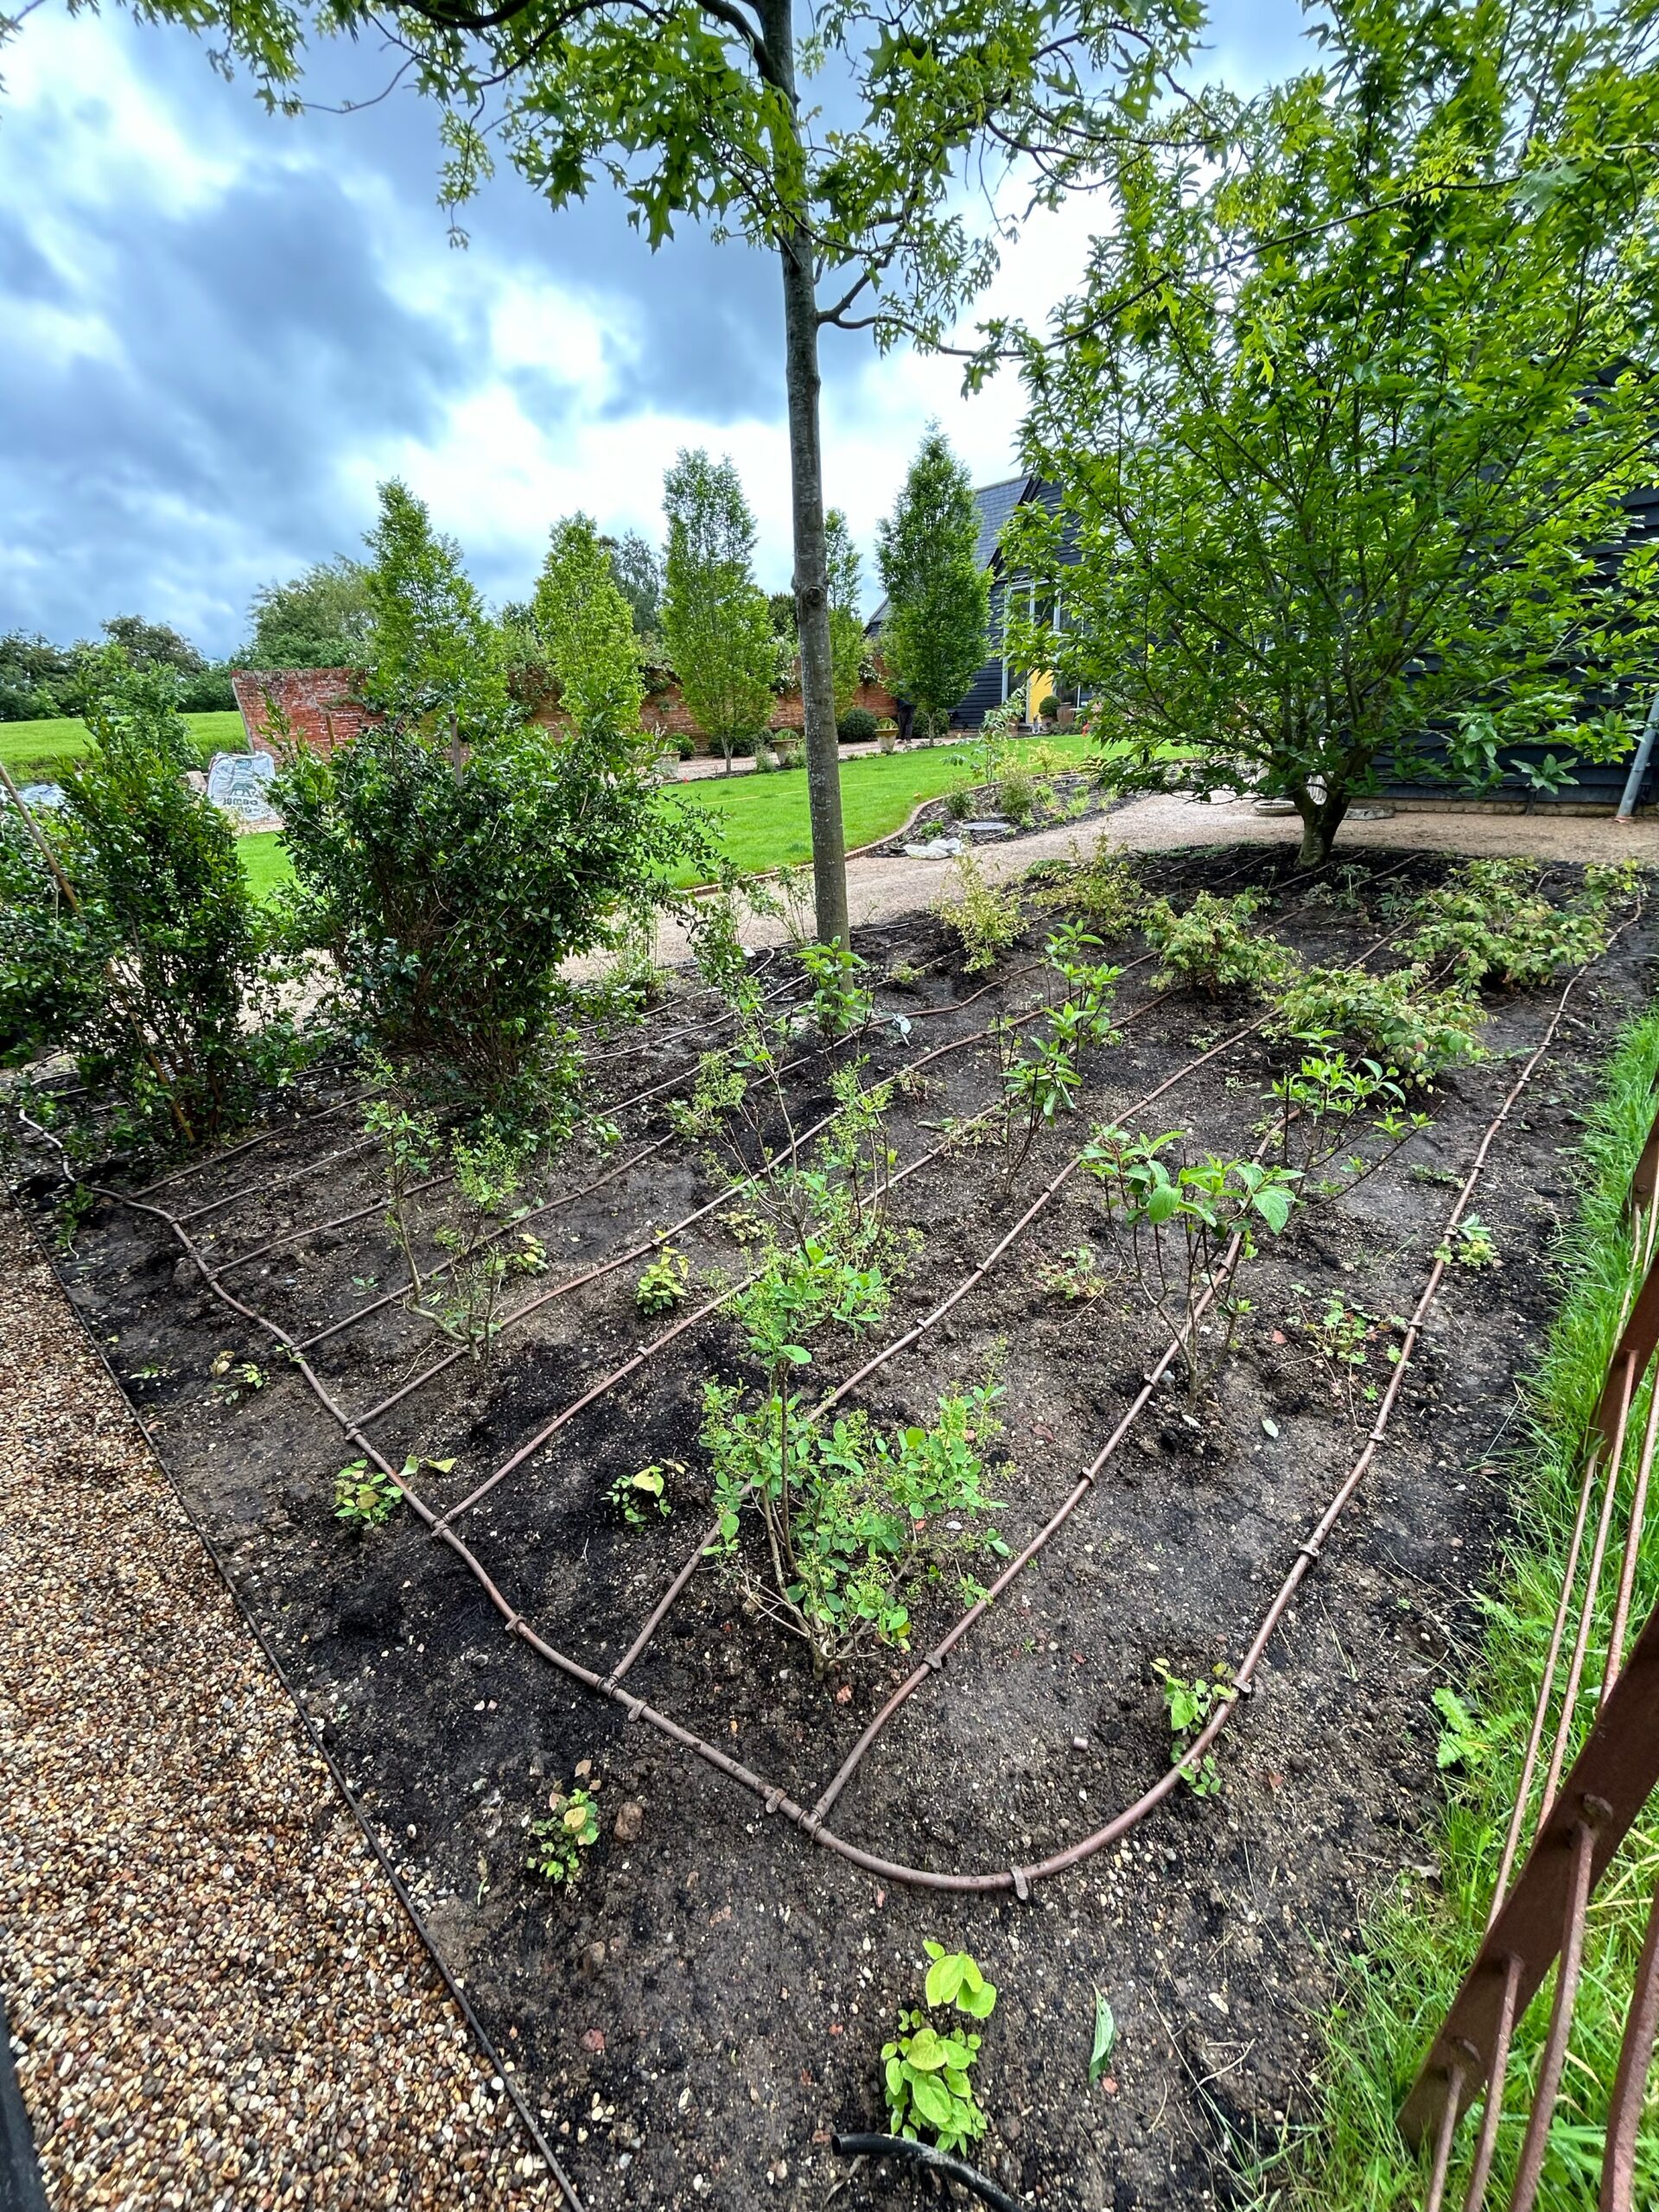 The efficiency of drip irrigation beats all other methods of watering plants - plants will be thriving in this bed with Rosewood Irrigation dripline installed